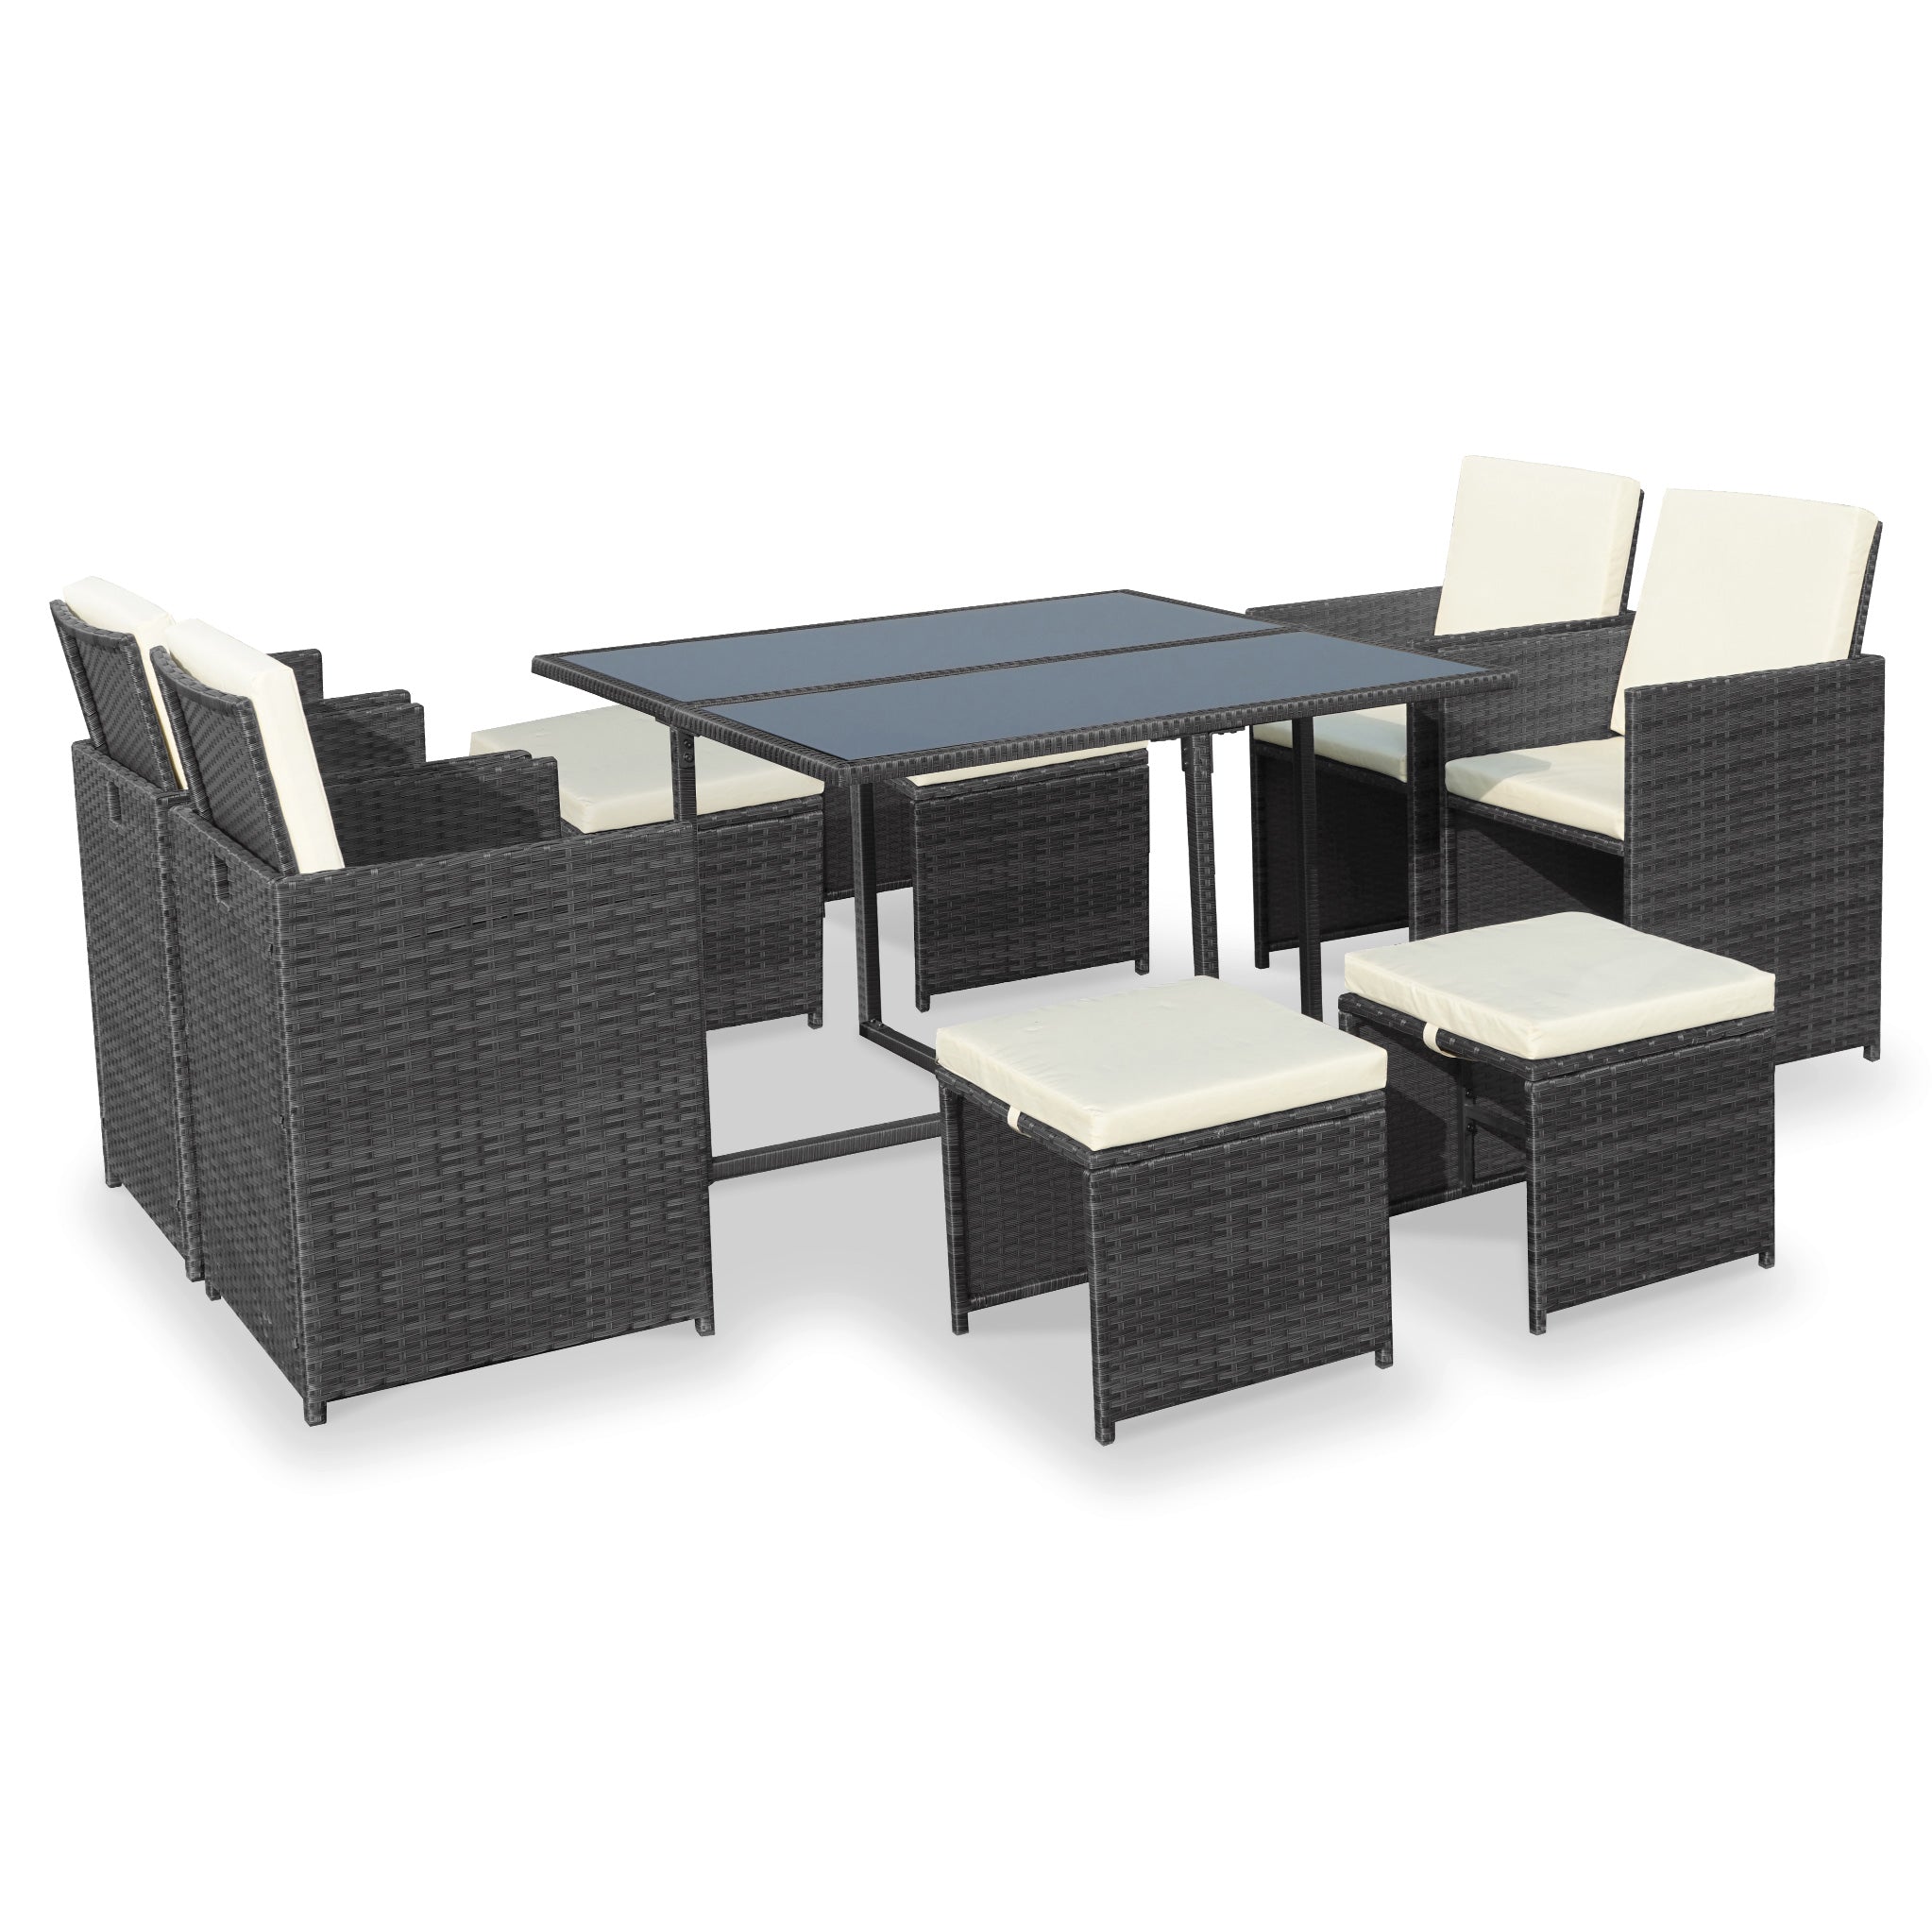 Cannes Outdoor 8 Seat Rattan Garden Cube Dining Set Brown Or Grey Roseland